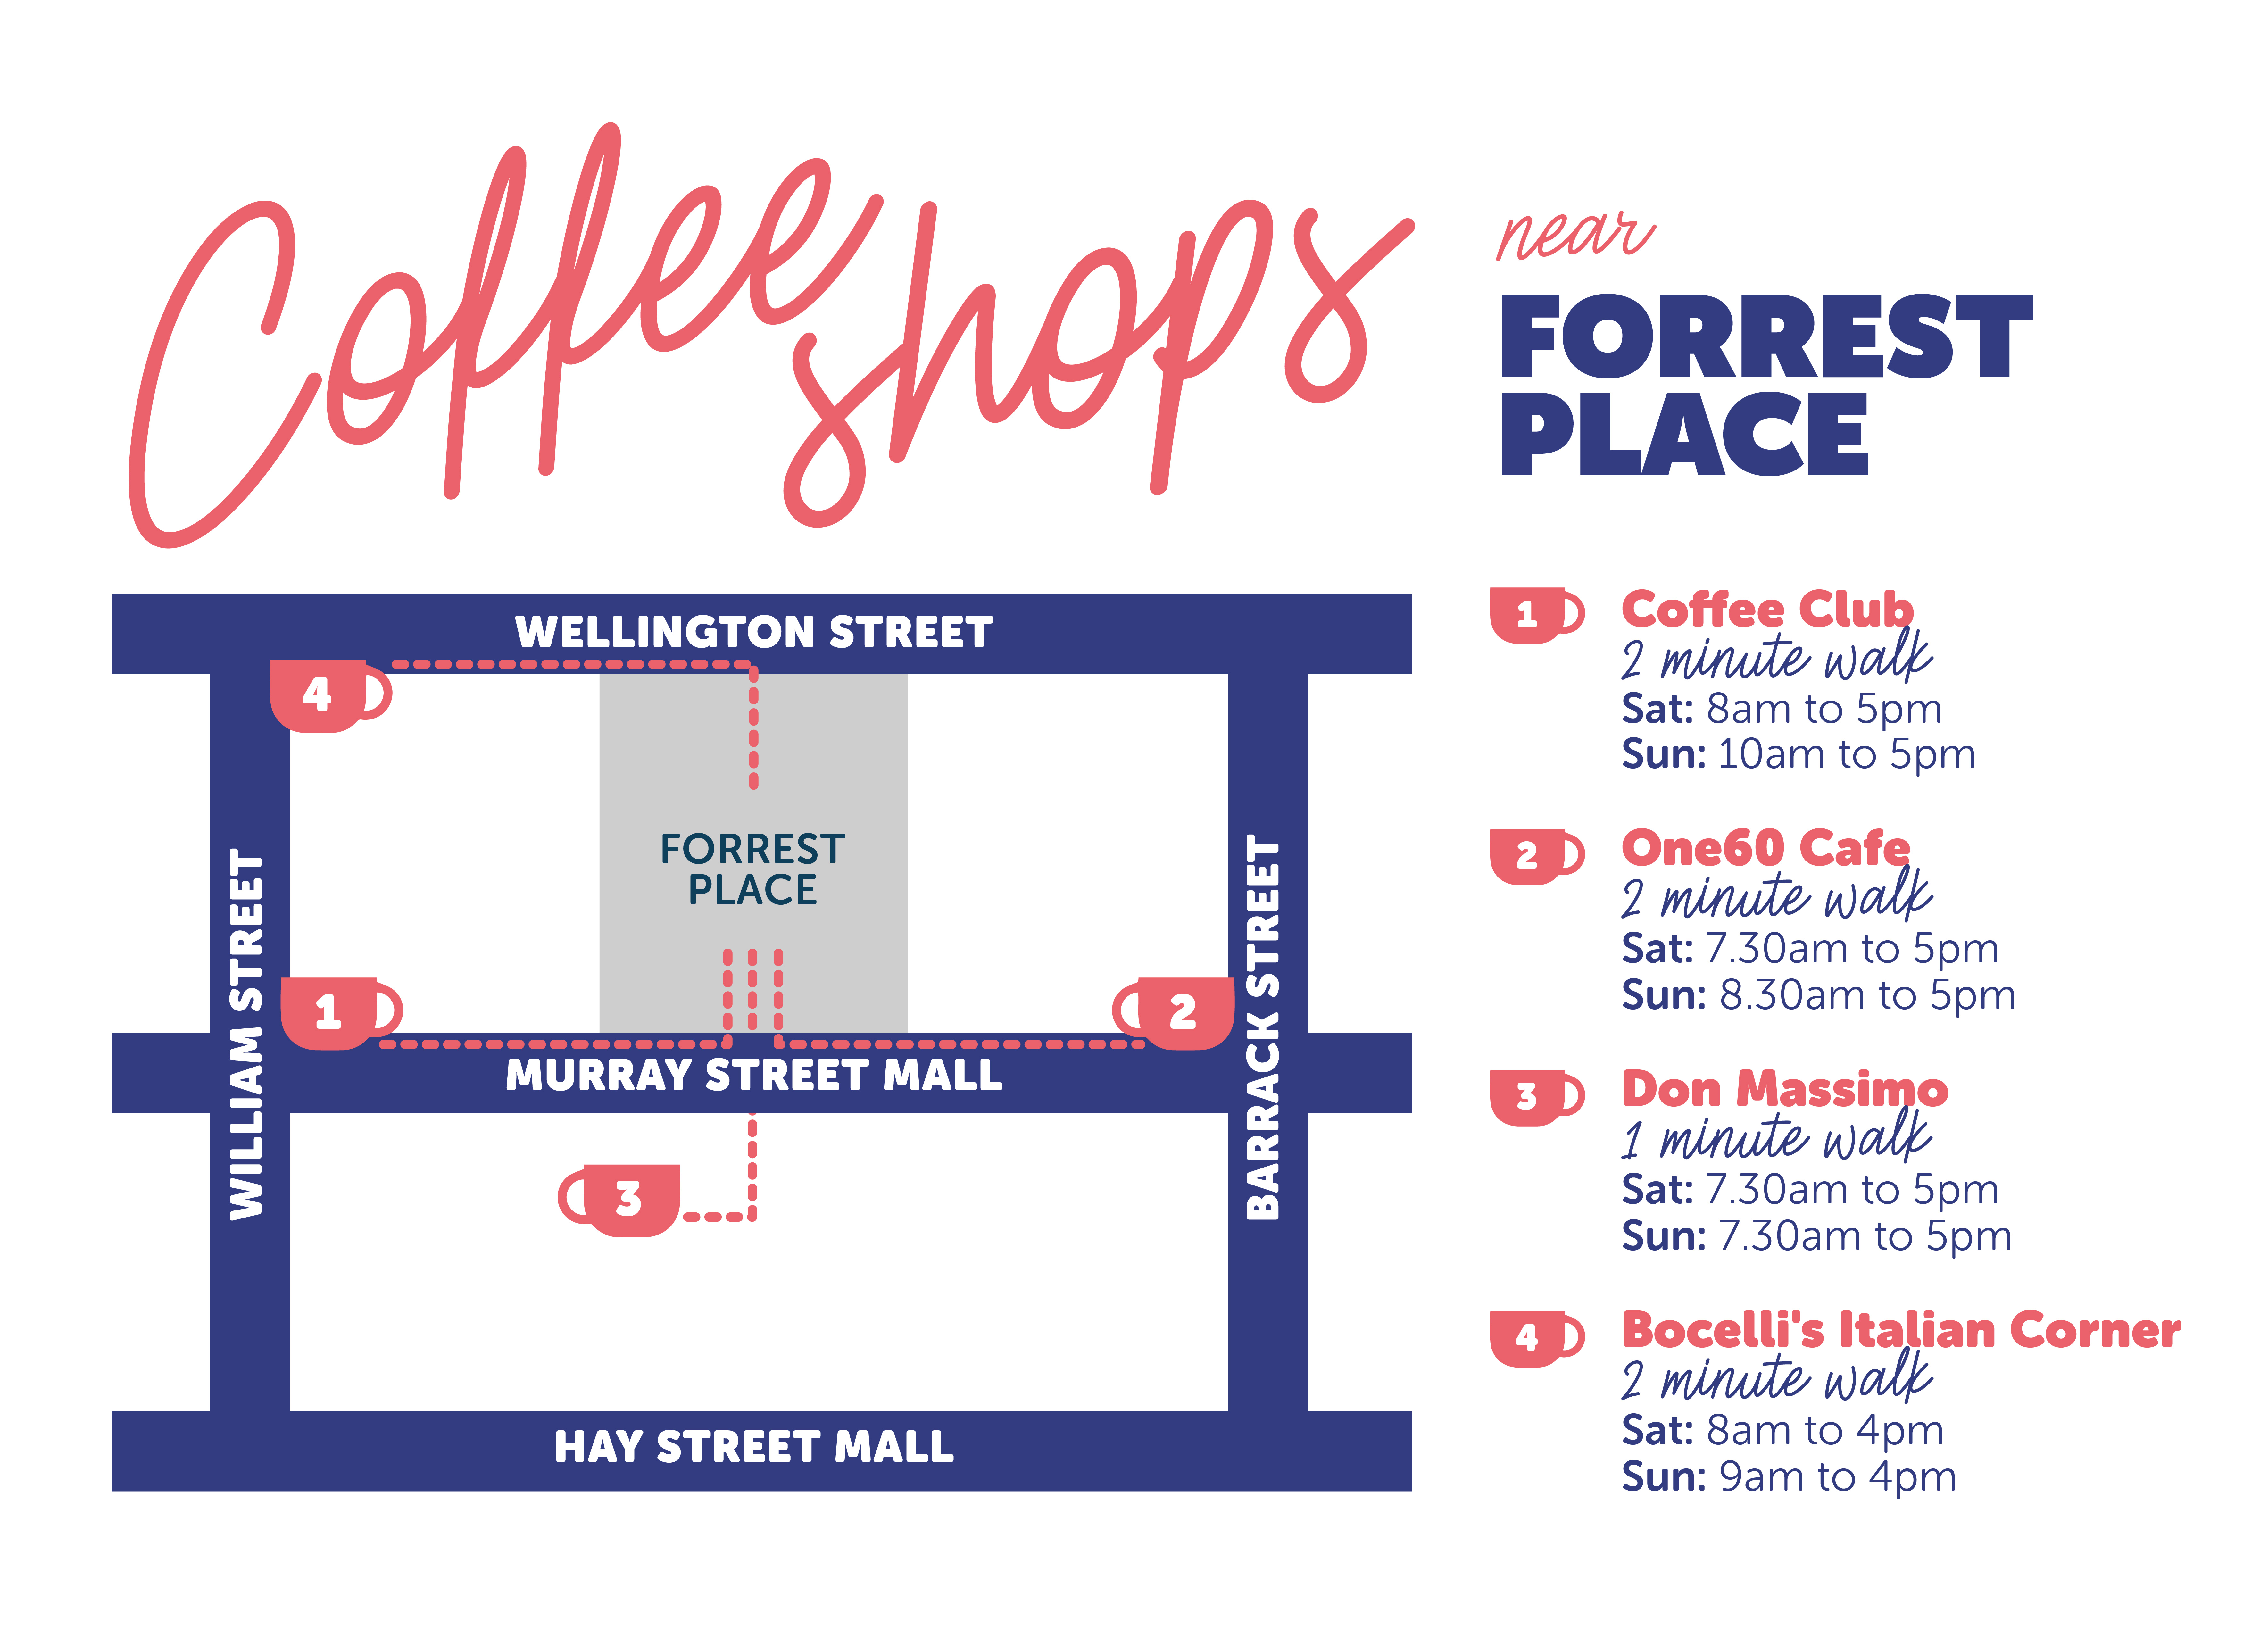 21-386 Coffee-Locations-Forrest Place NOV18-1125